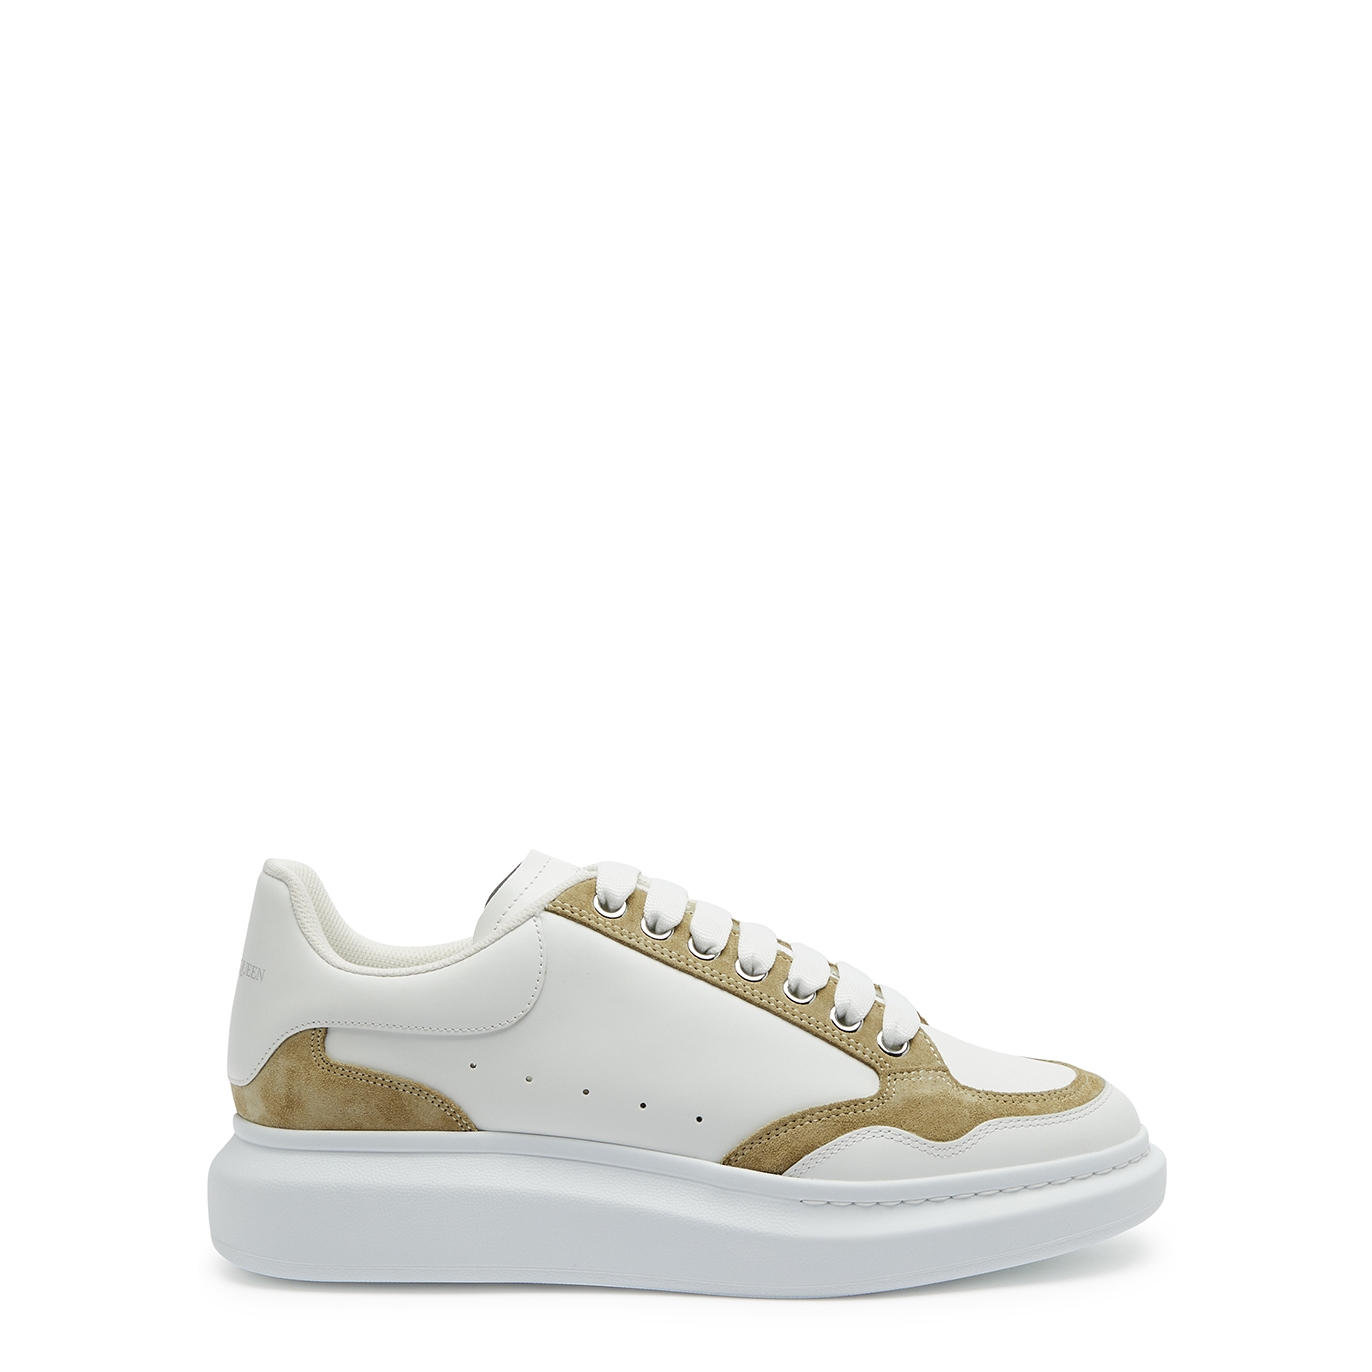 ALEXANDER MCQUEEN OVERSIZED PANELLED LEATHER SNEAKERS